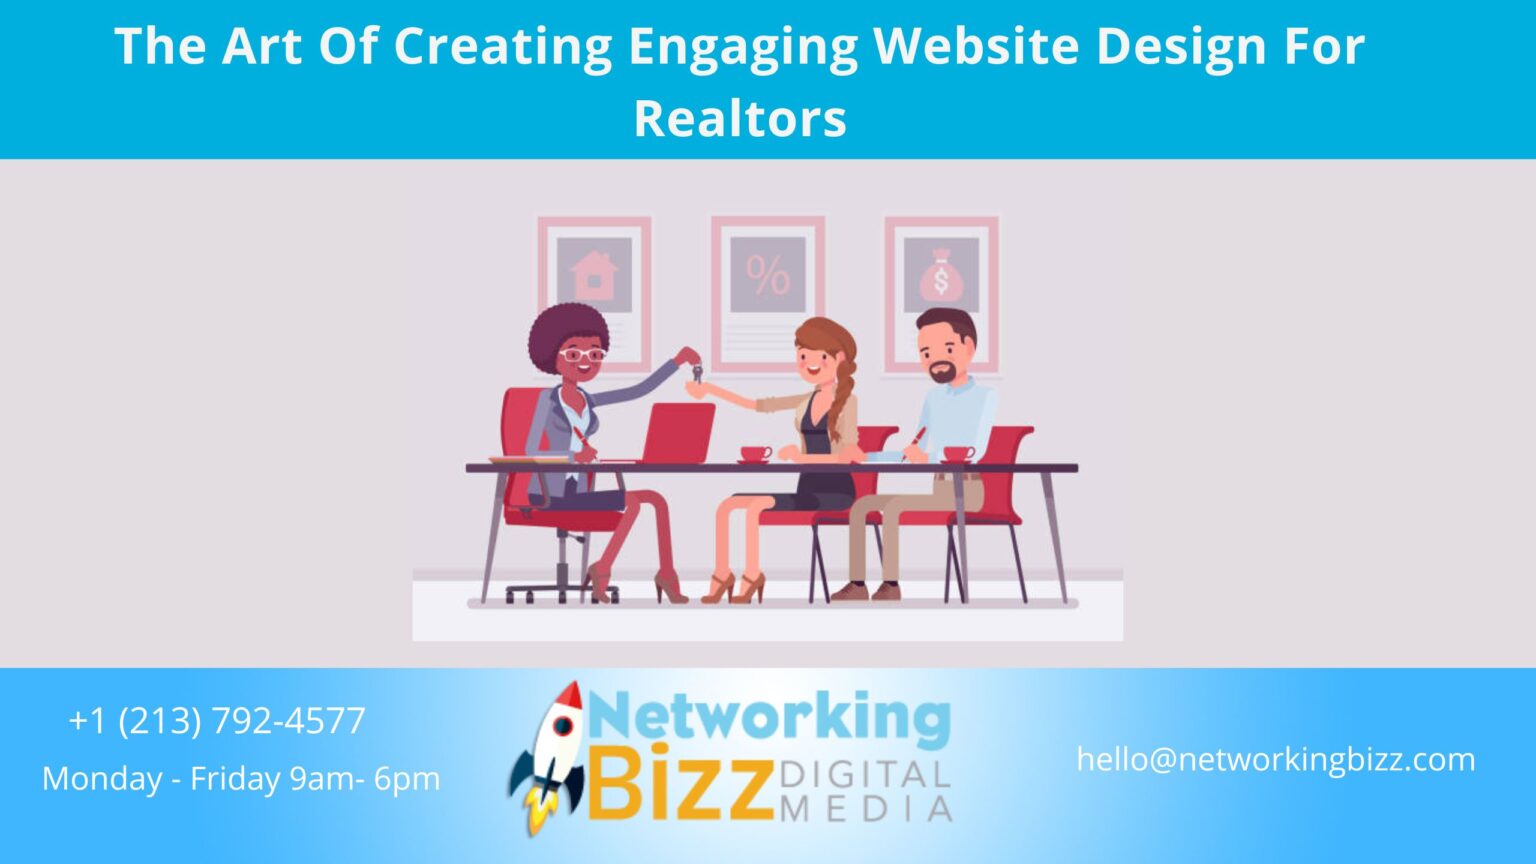 The Art Of Creating Engaging Website Design For Realtors